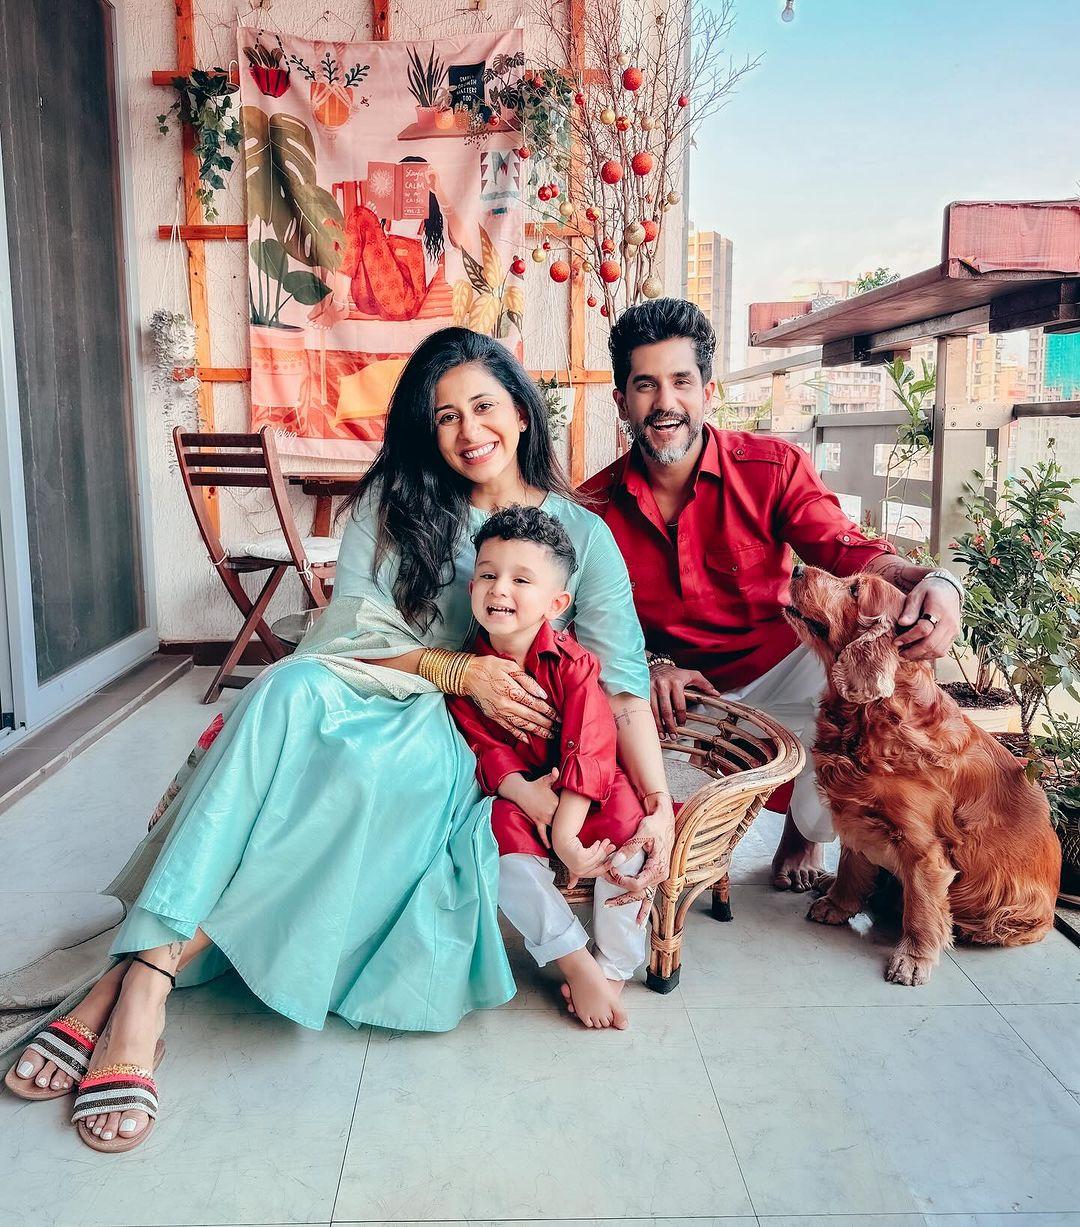 It was three years back in 2021 when Kishwer Merchantt welcomed her first kid with husband Suyyash Rai. Kishwer was 41 years old when she became a mother to Nirvair